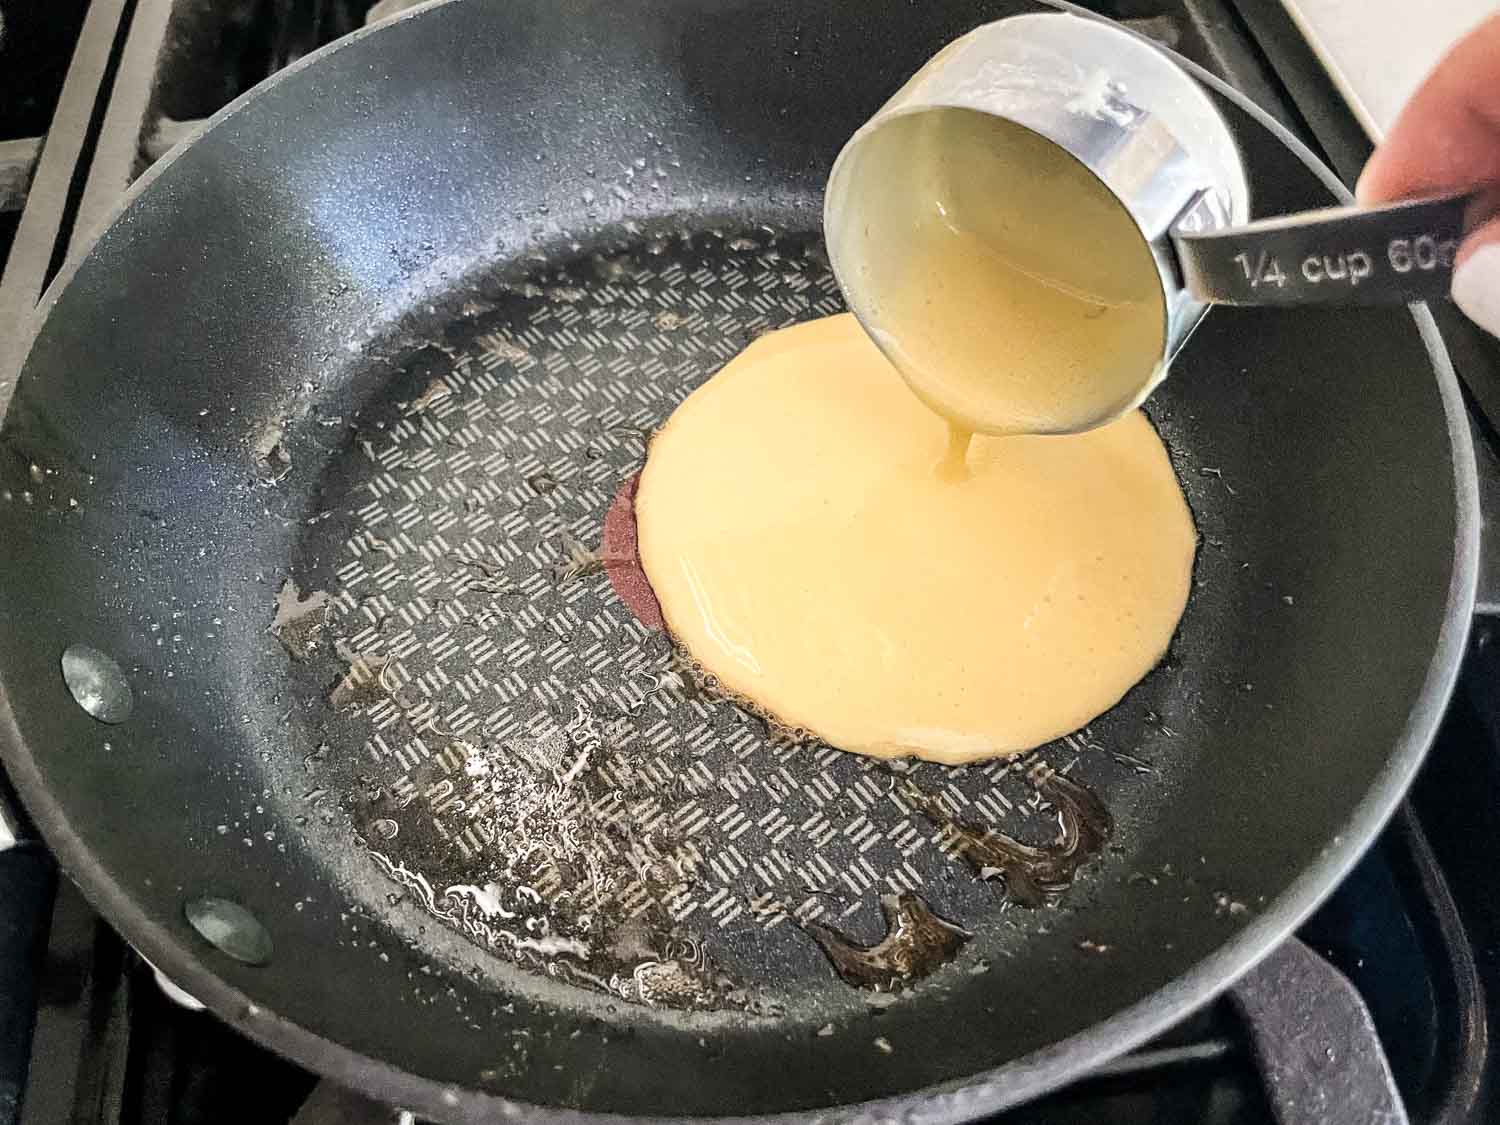 Pour the batter into a buttered skillet